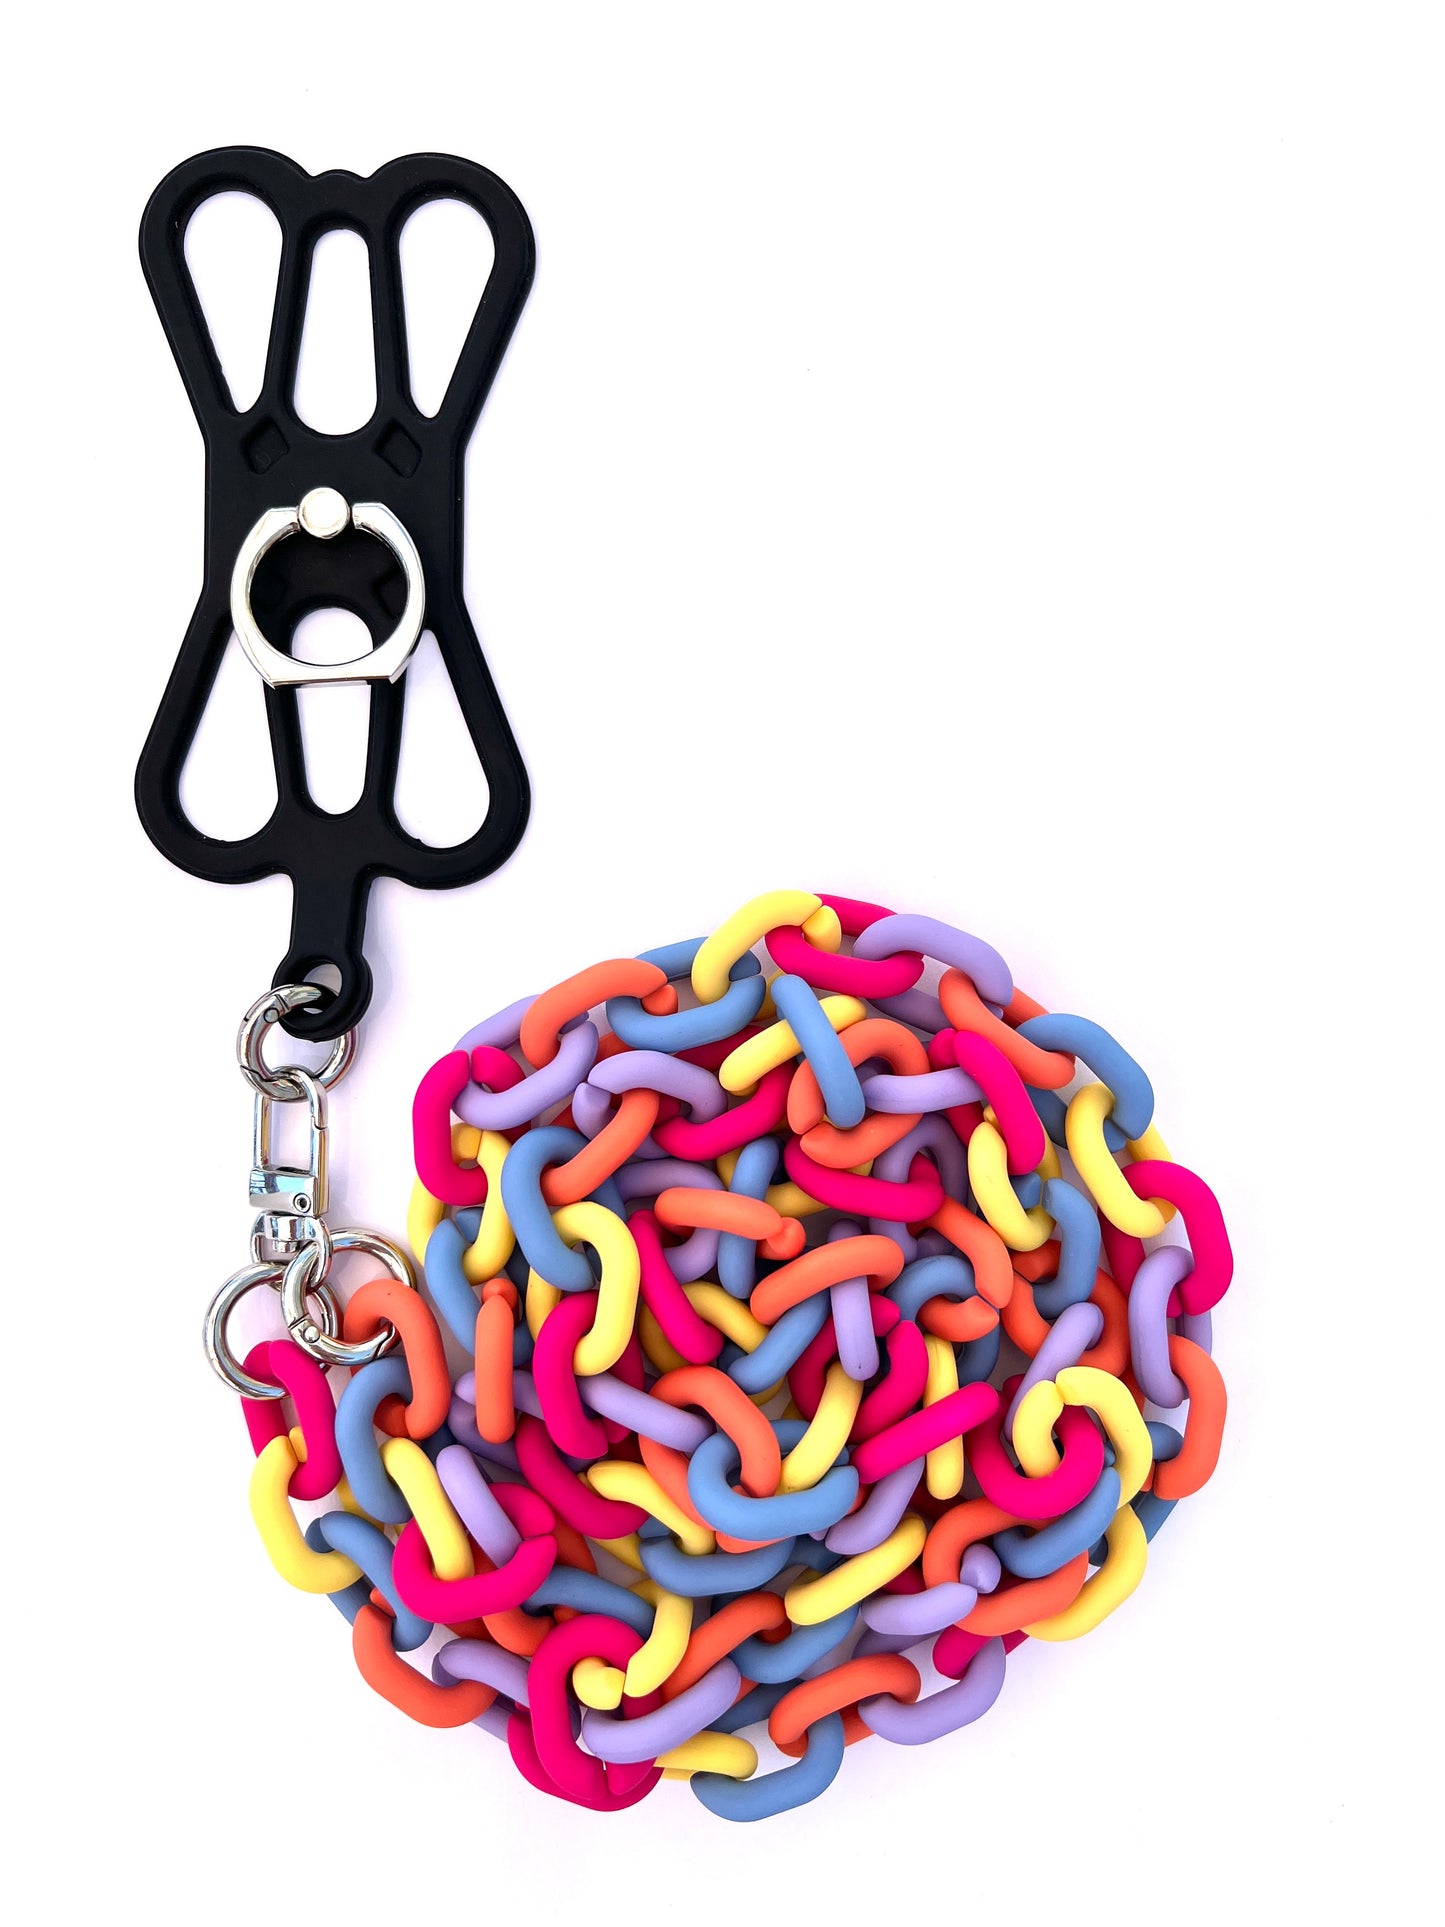 Silicon Holder Phone Strap - Colorful Link Chain